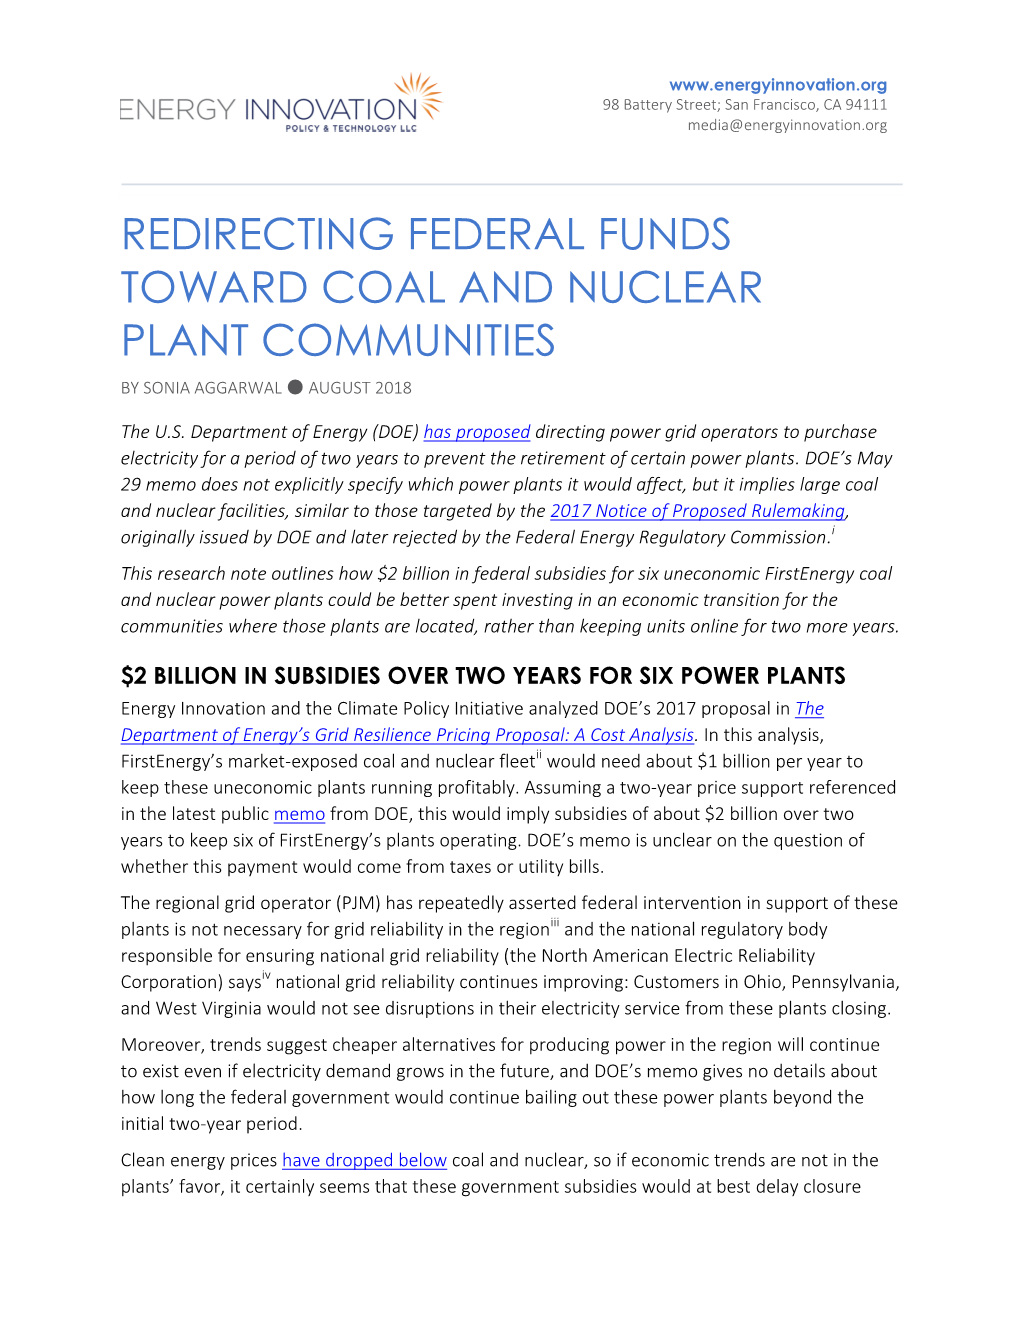 Redirecting Federal Funds Toward Coal and Nuclear Plant Communities by Sonia Aggarwal ● August 2018